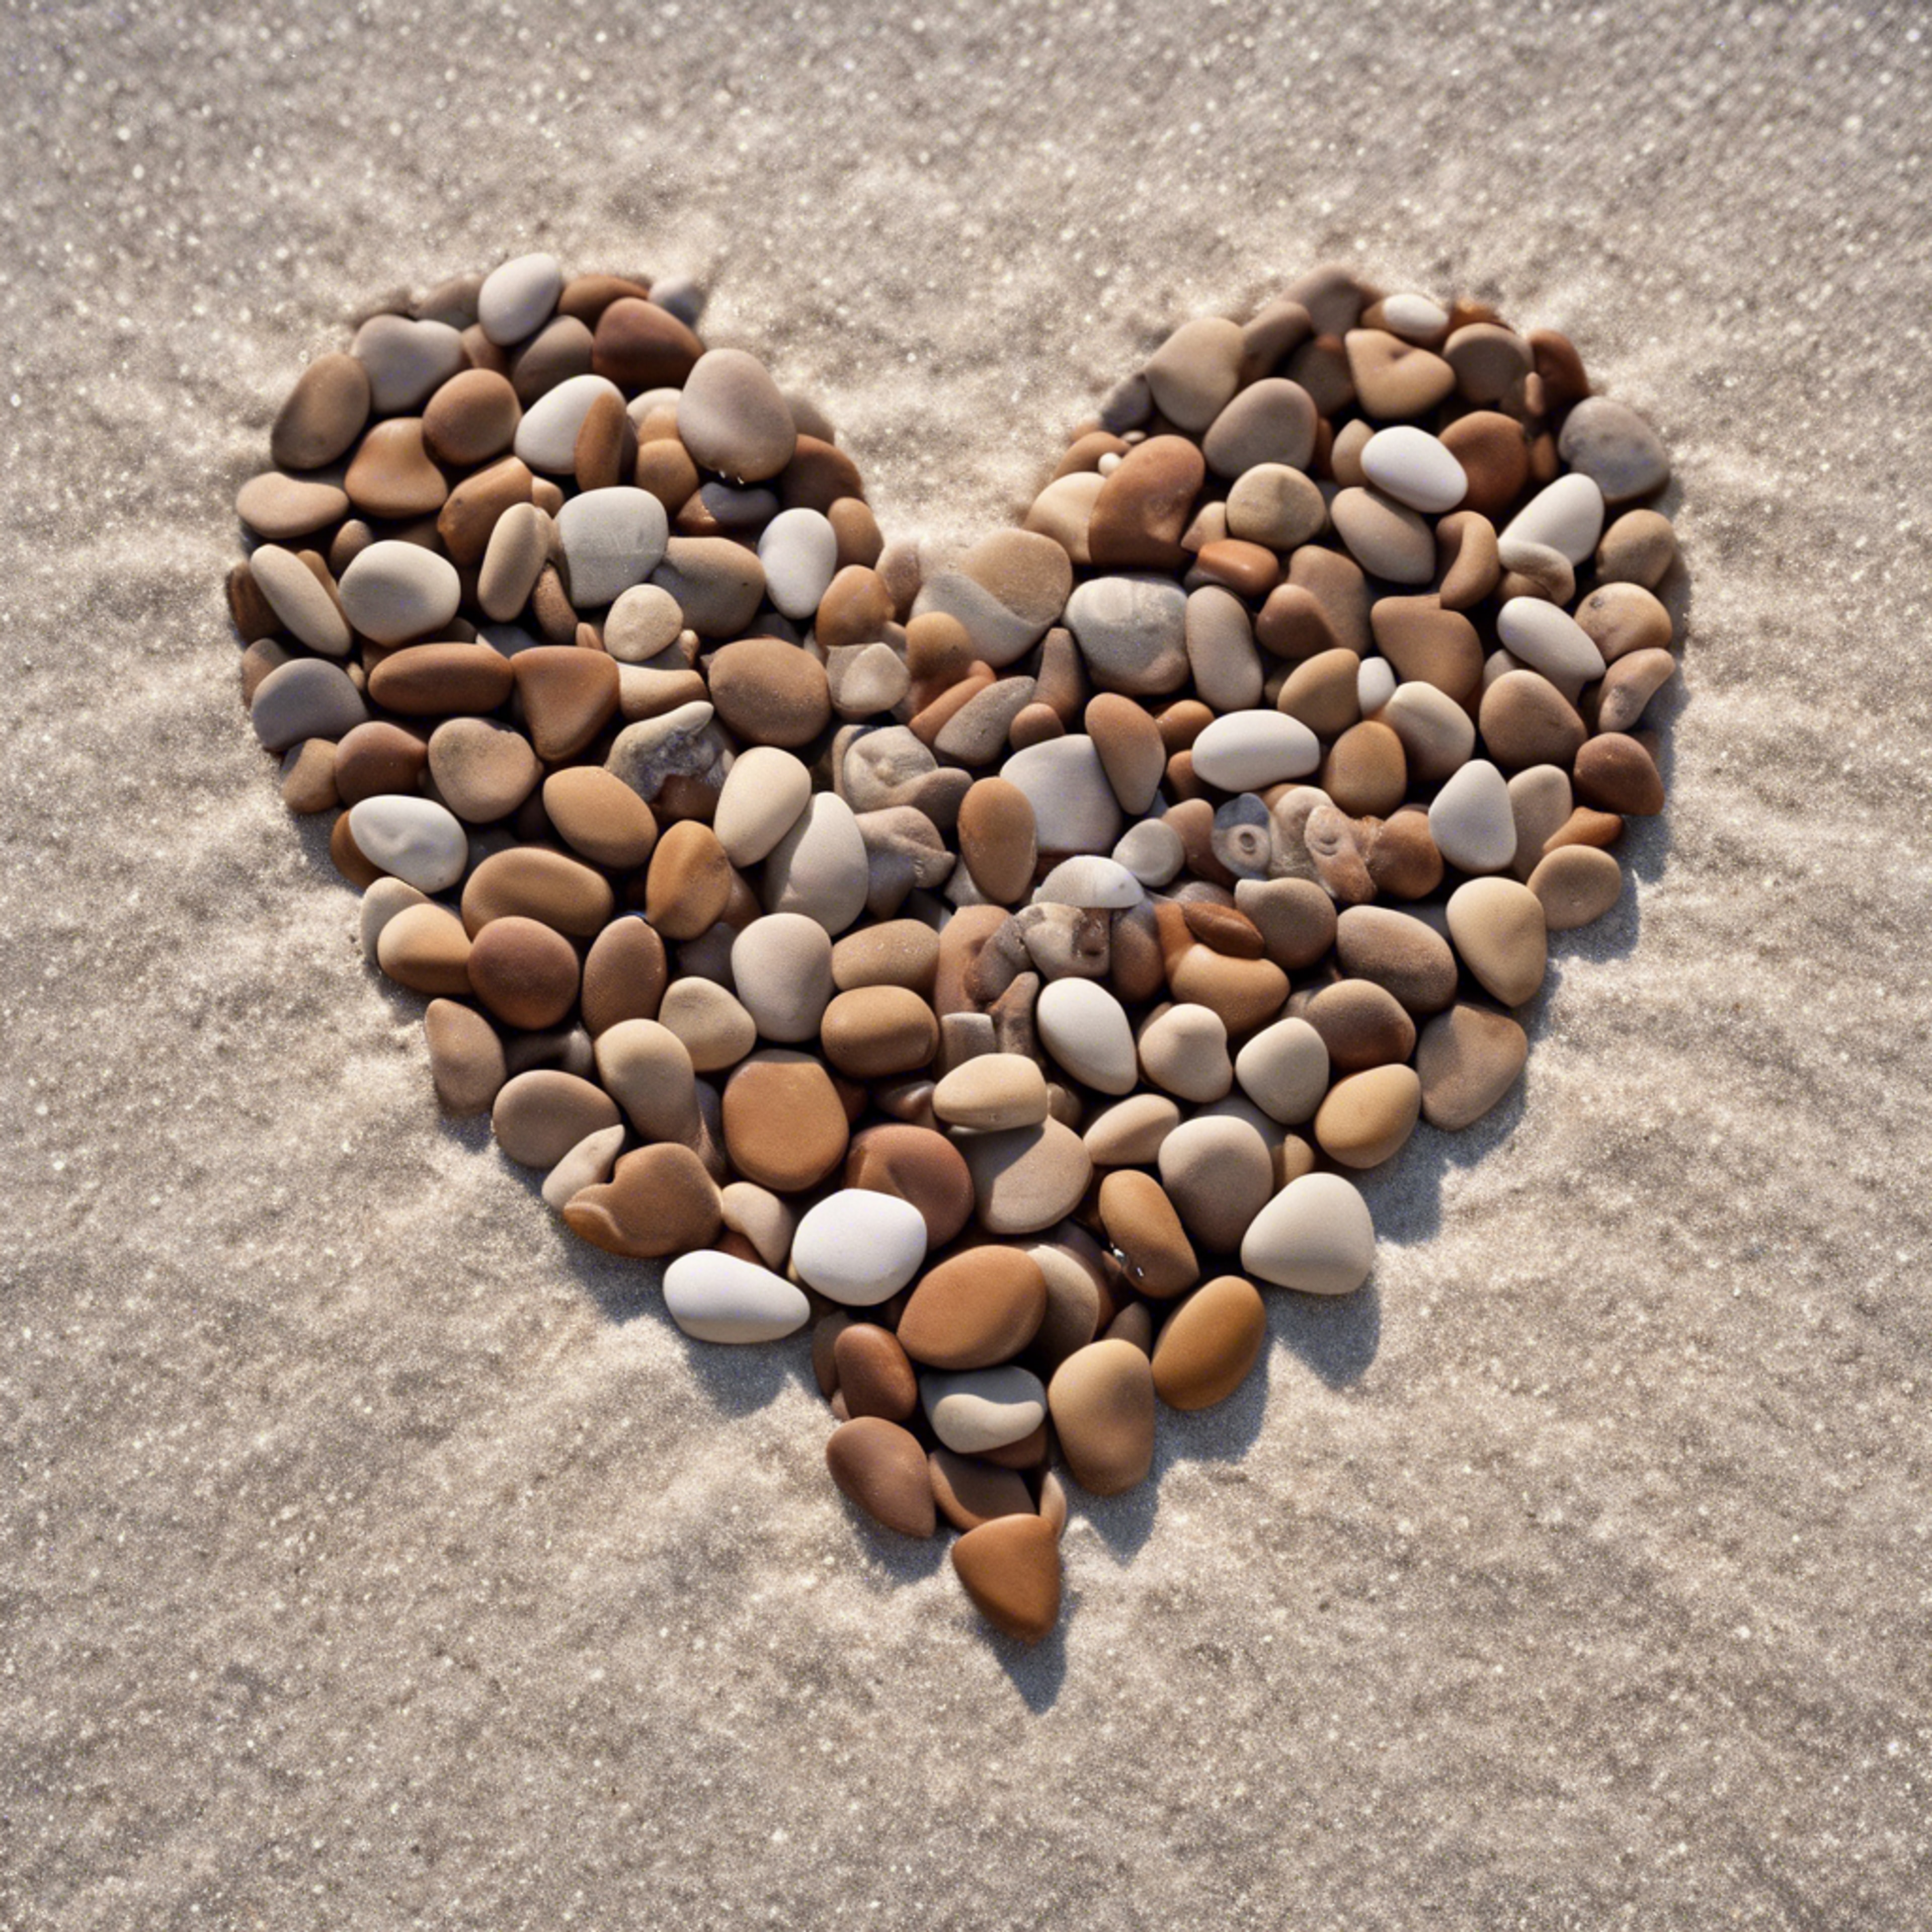 A heart made from brown pebbles on a white sandy beach by the seaside.壁紙[b4f9e48b18fc4f5485b3]